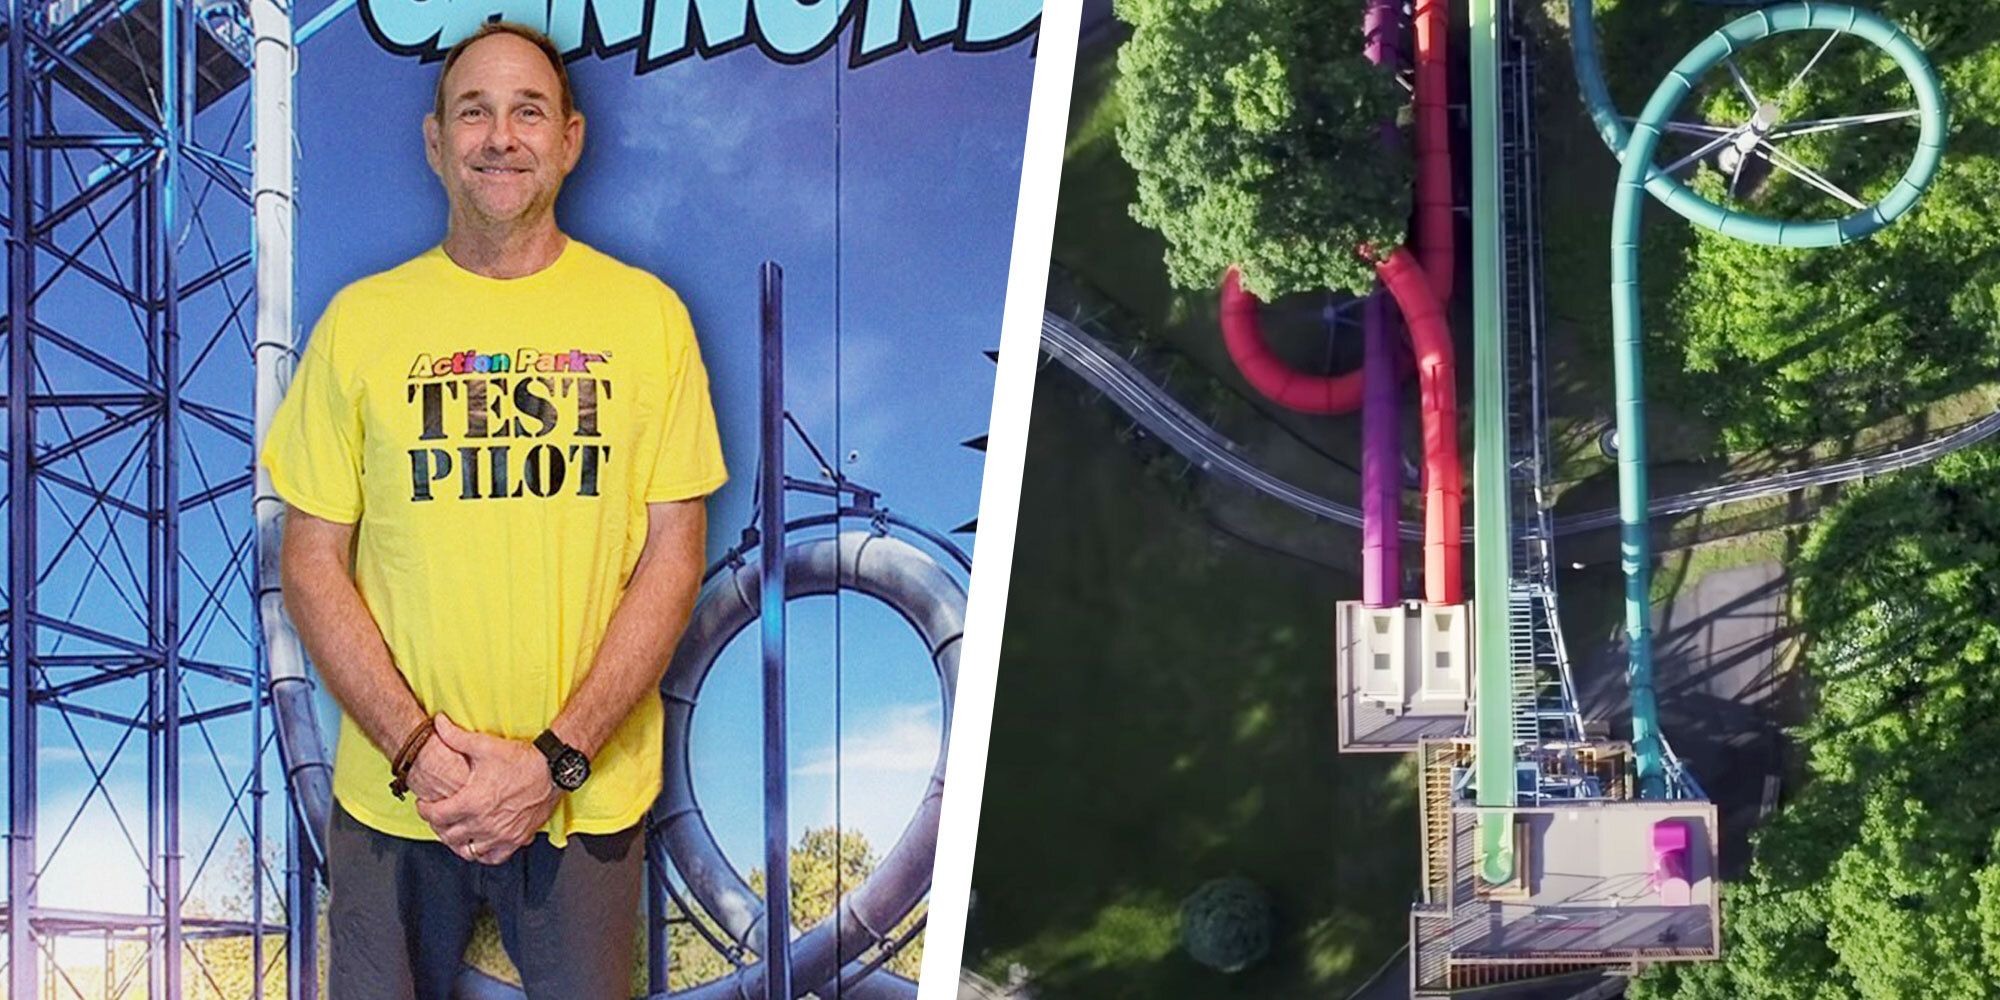 Bank Plicht Herenhuis Action Park Employee Tells True Story of Testing Cannonball Loop